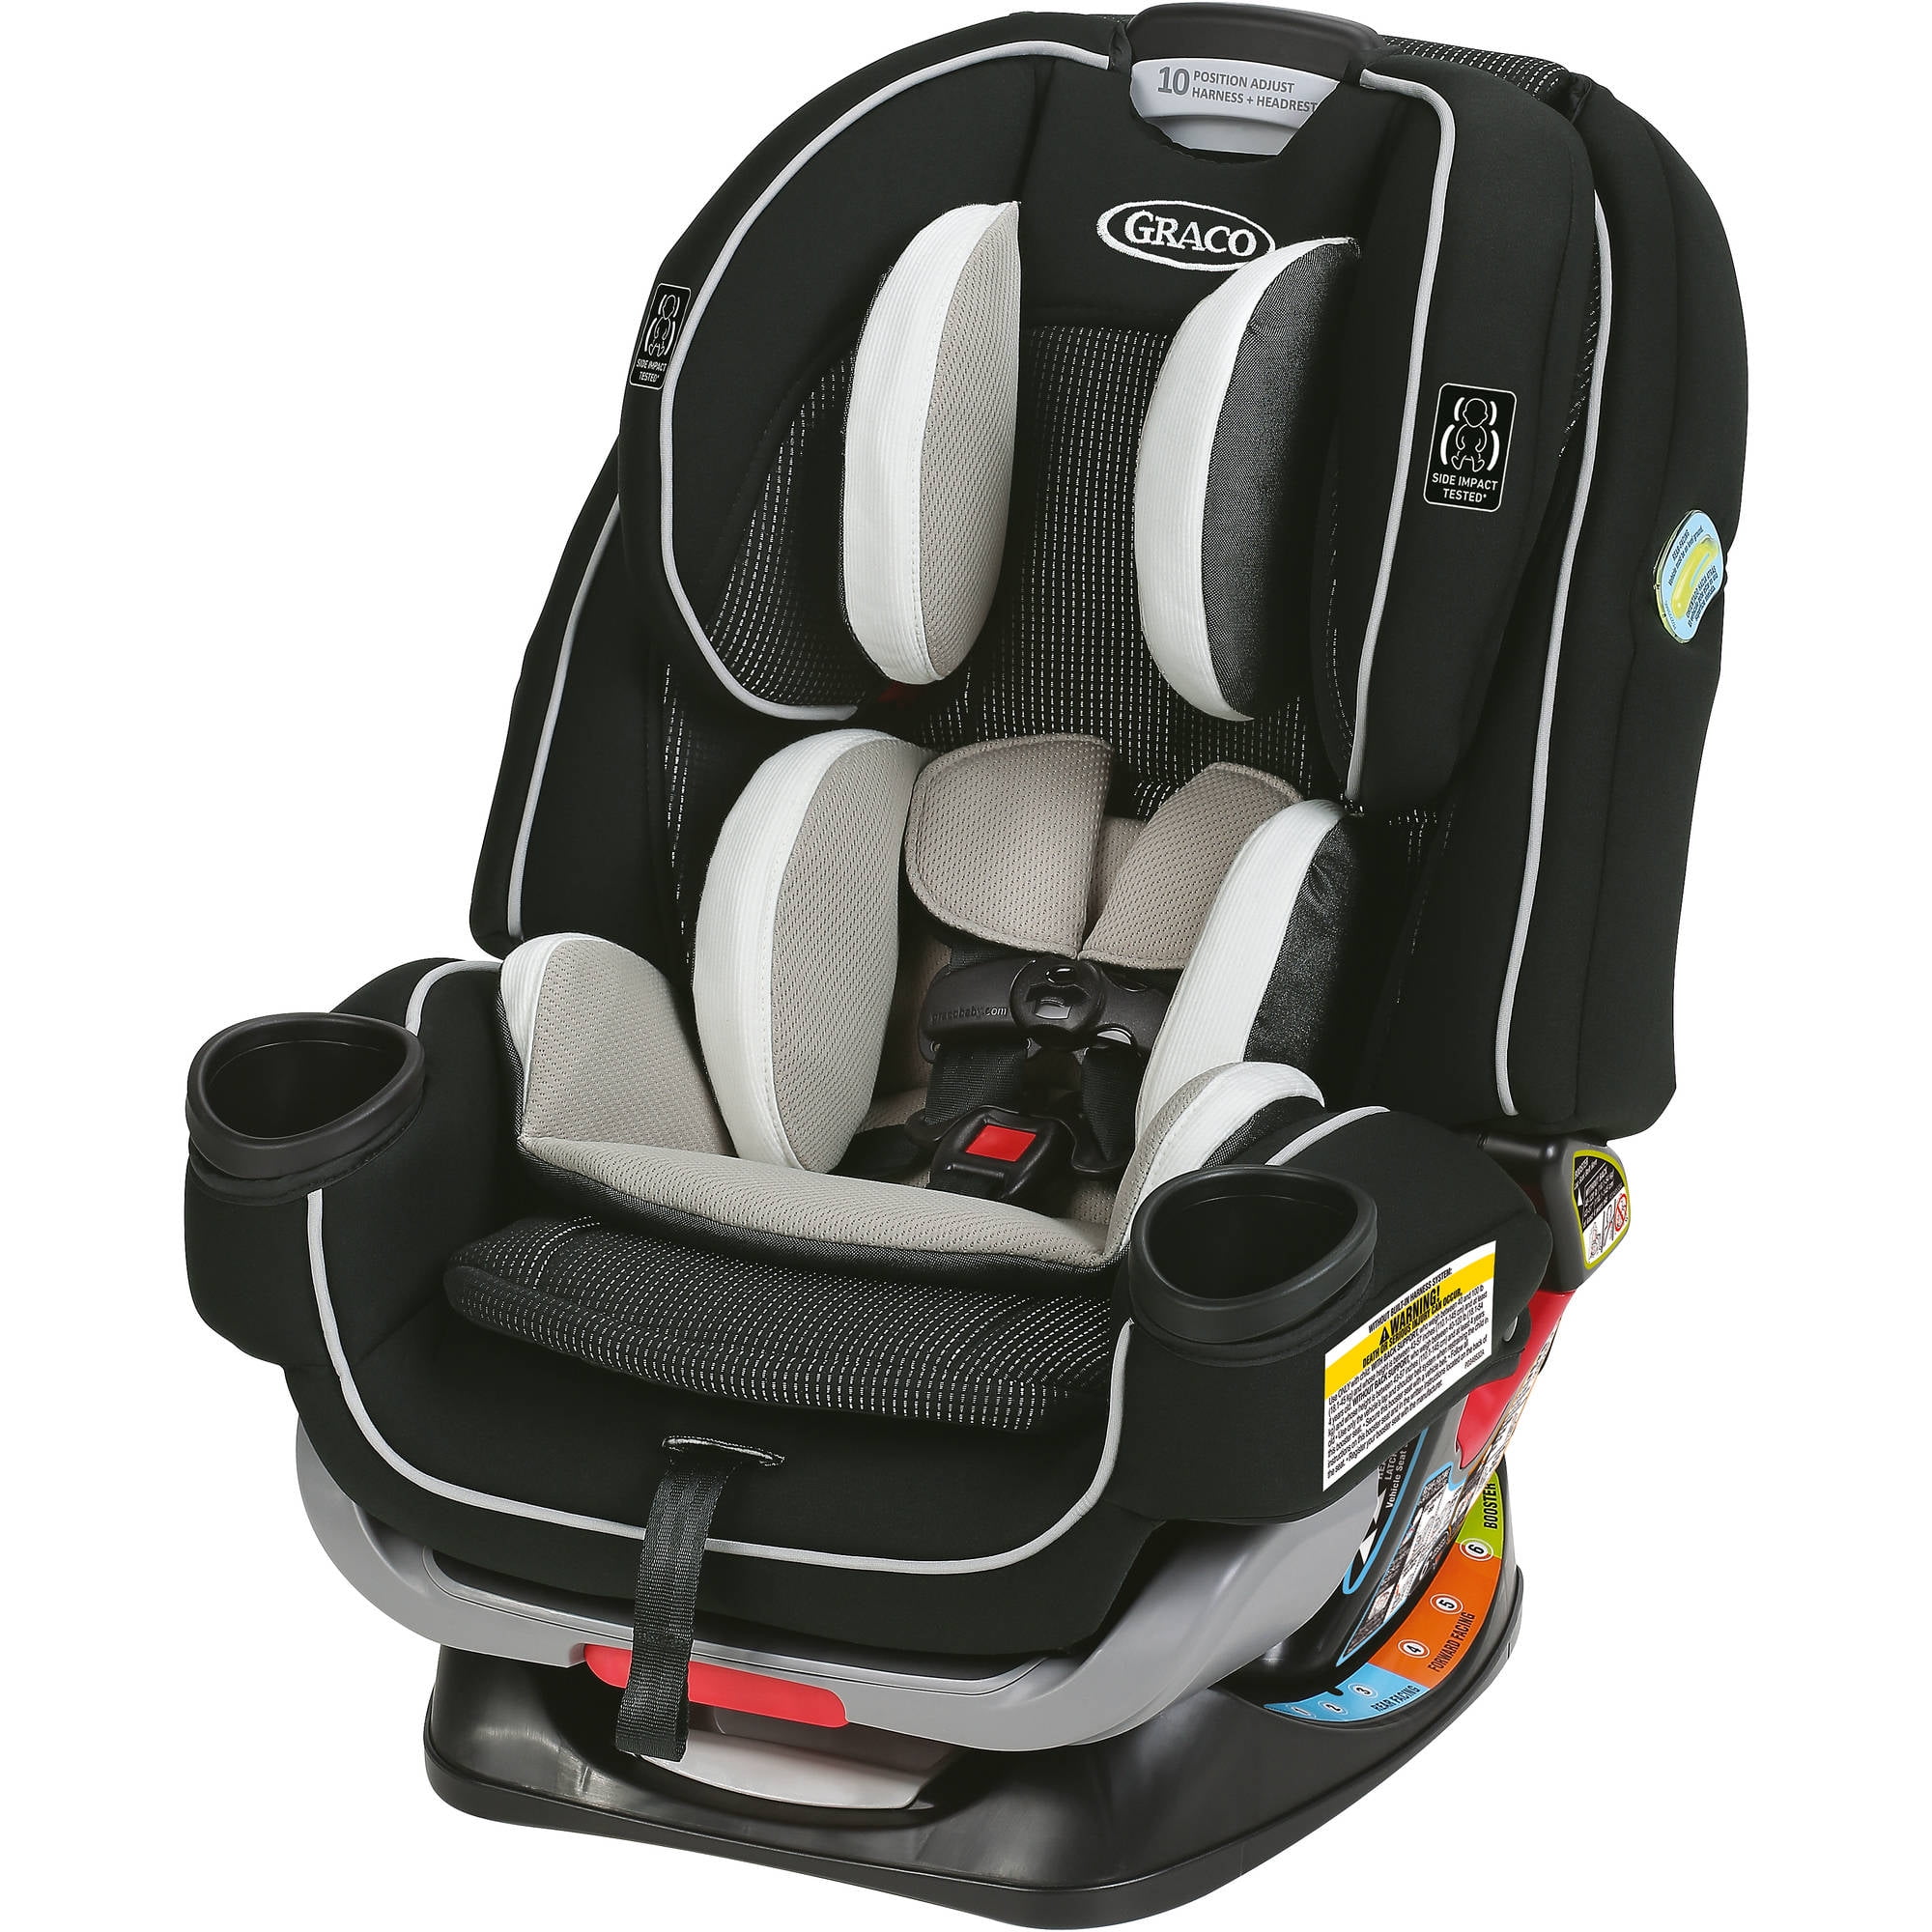 Graco 4Ever DLX 4-in-1 Convertible Car Seat New! 